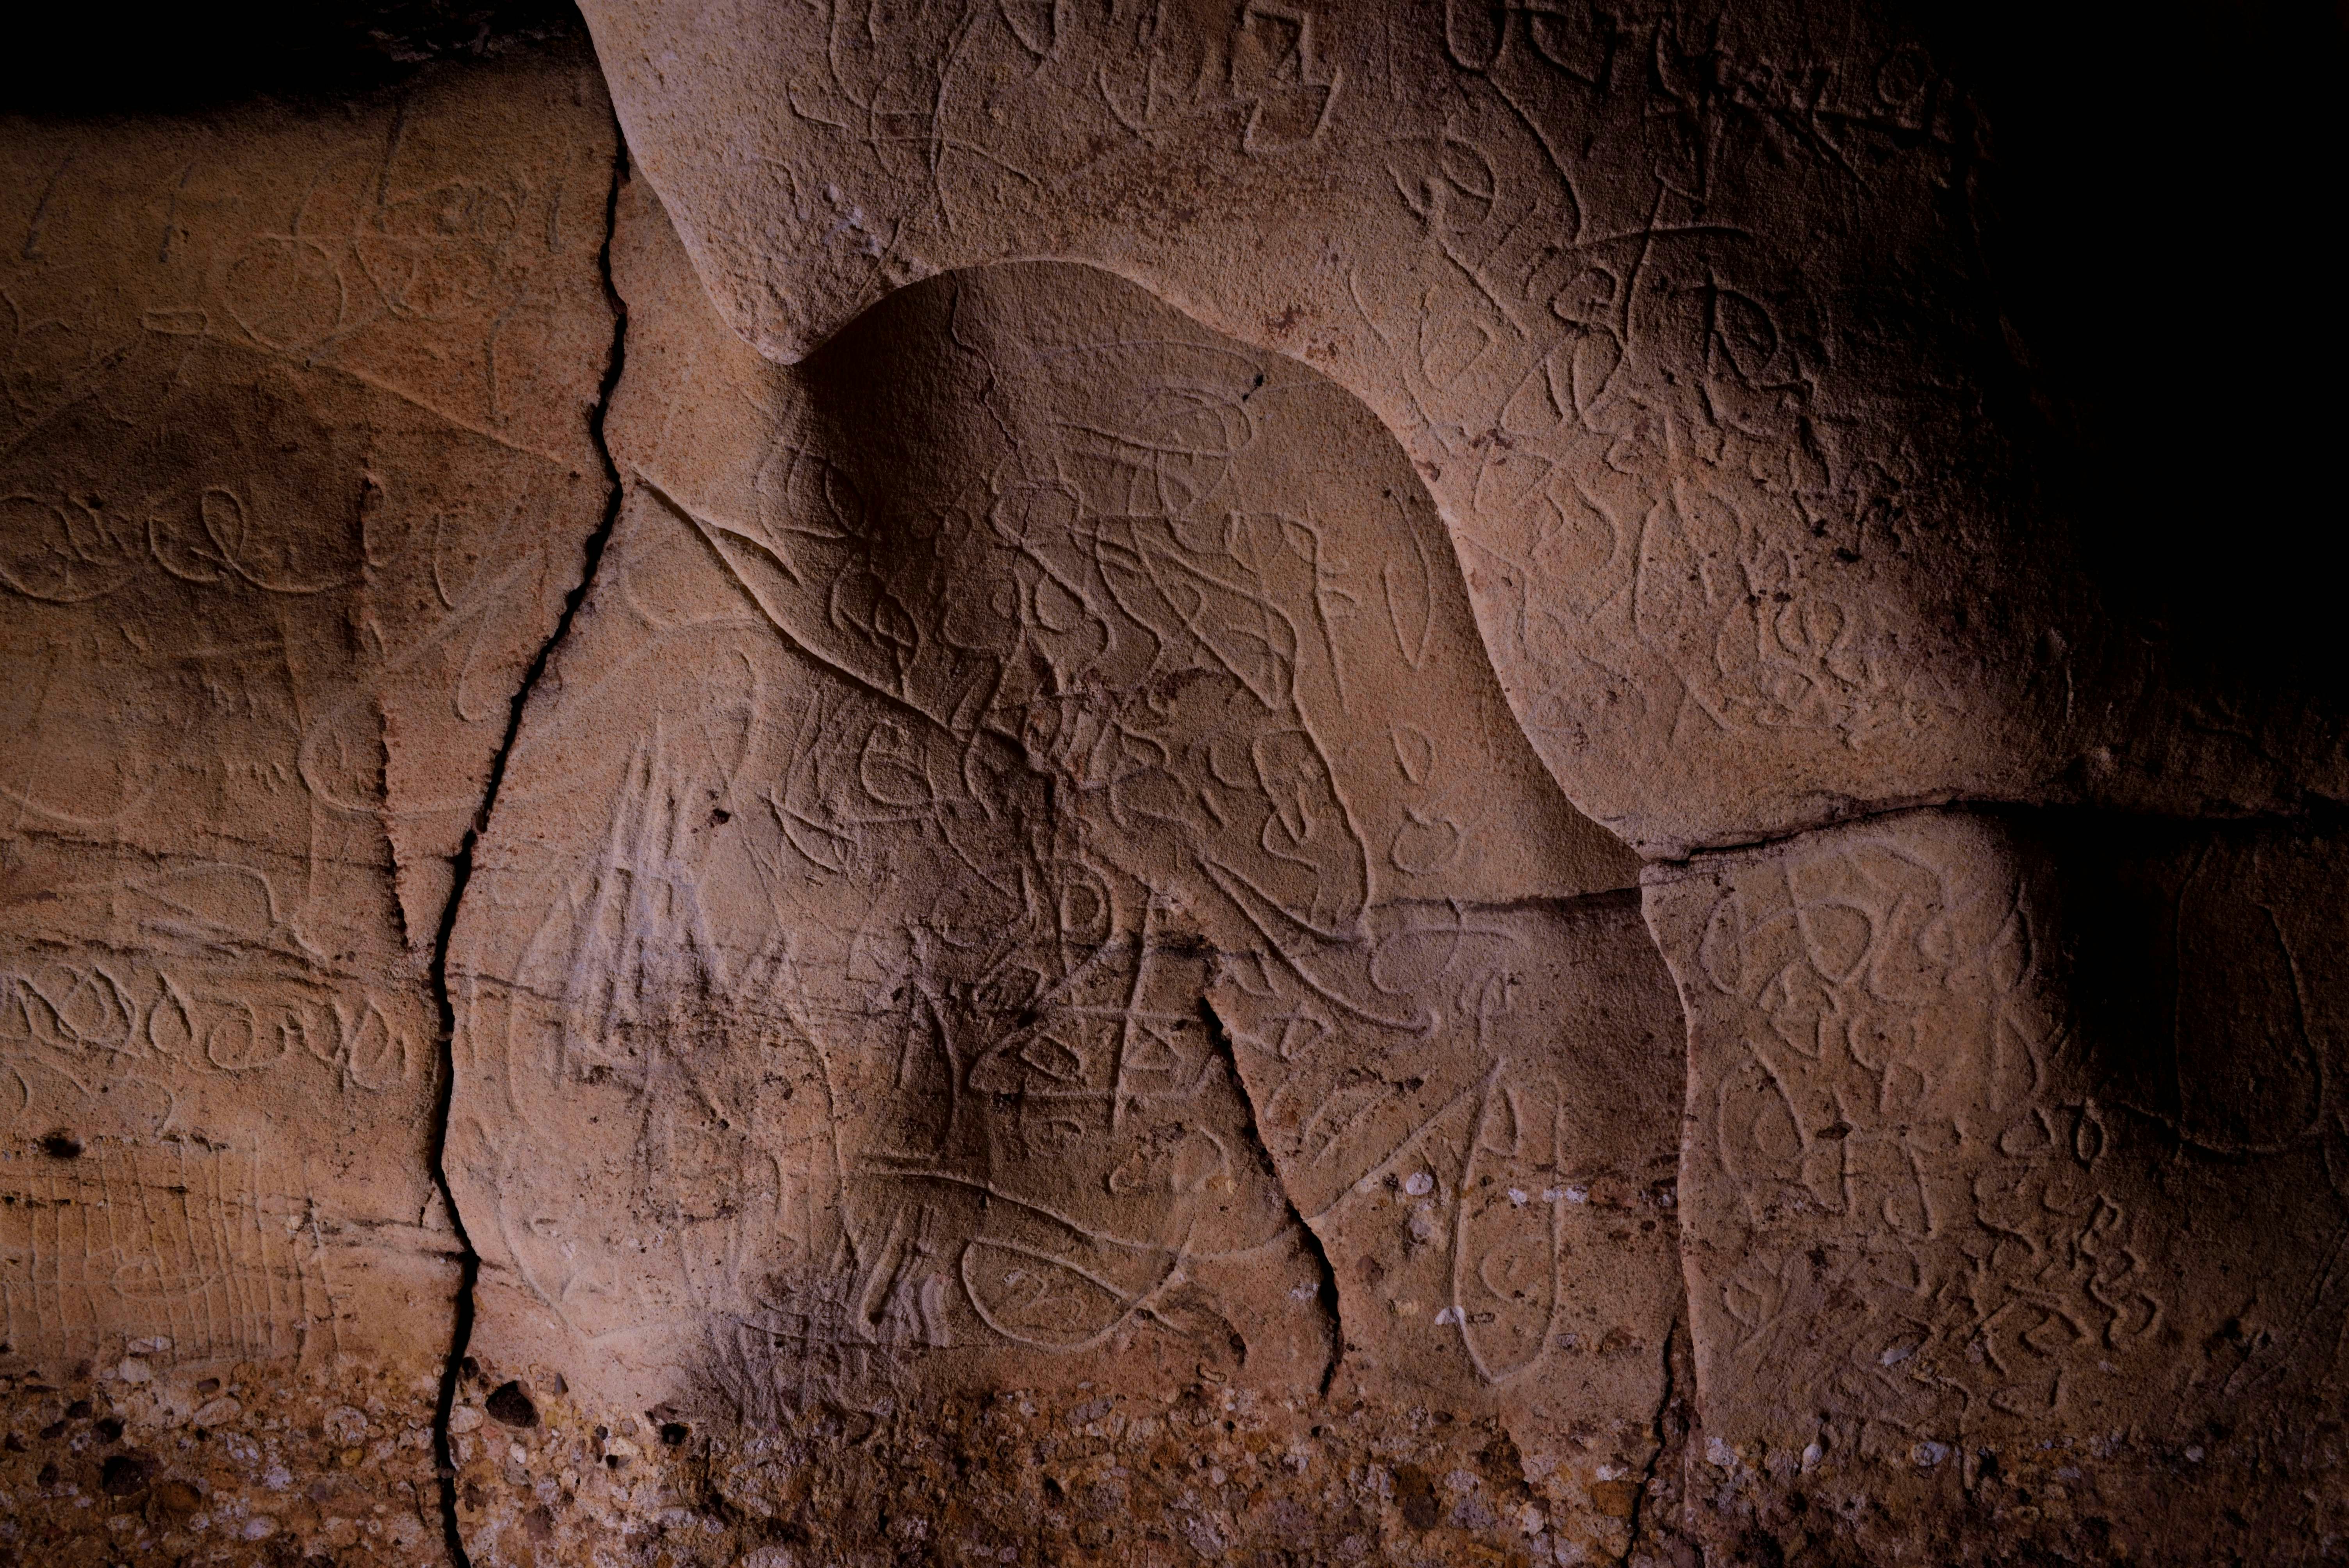 Ancient abstract drawings on the walls of a cave in Spain